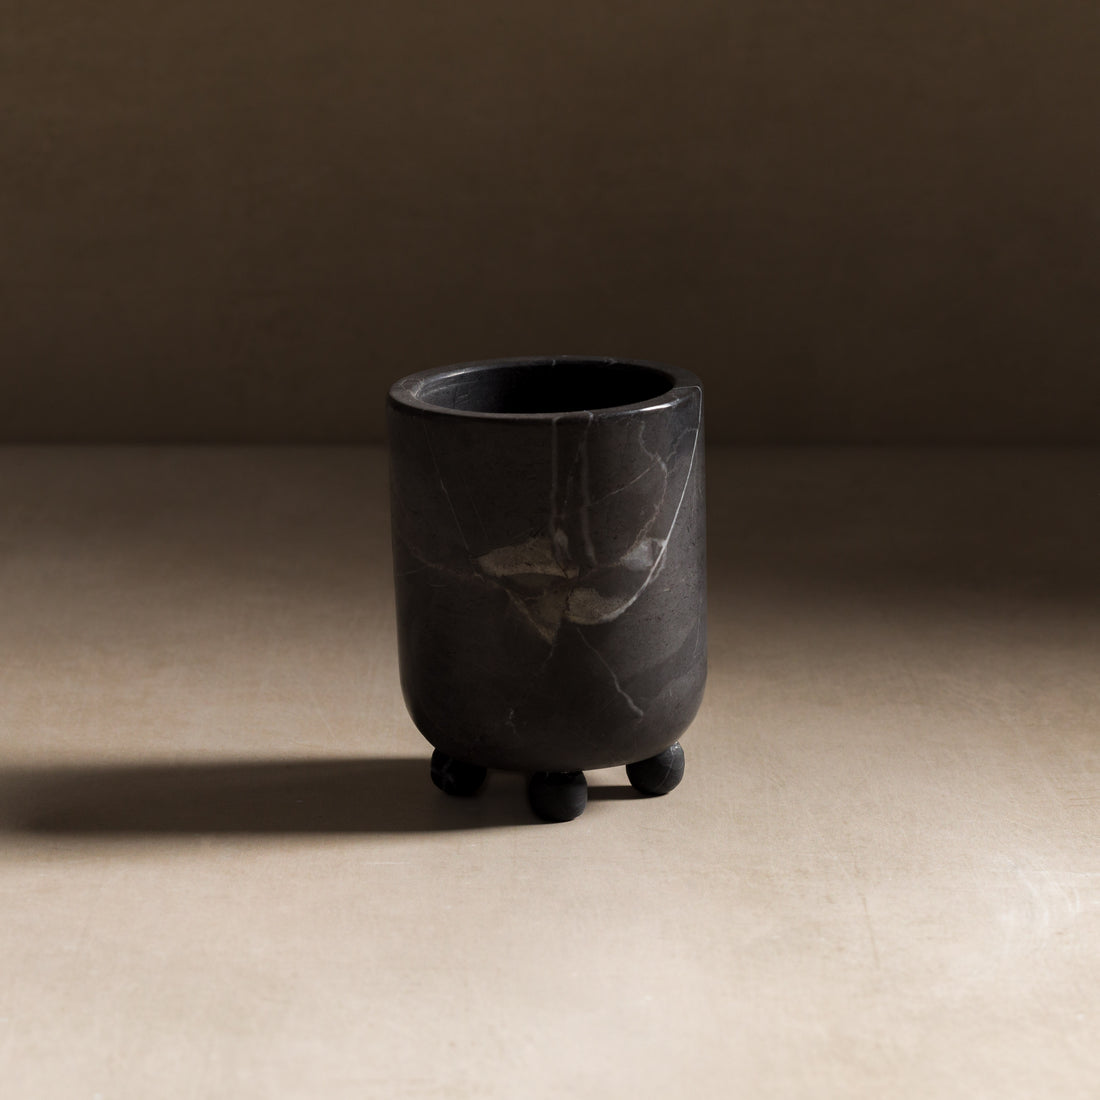 Small vessel made of black marble for home decor